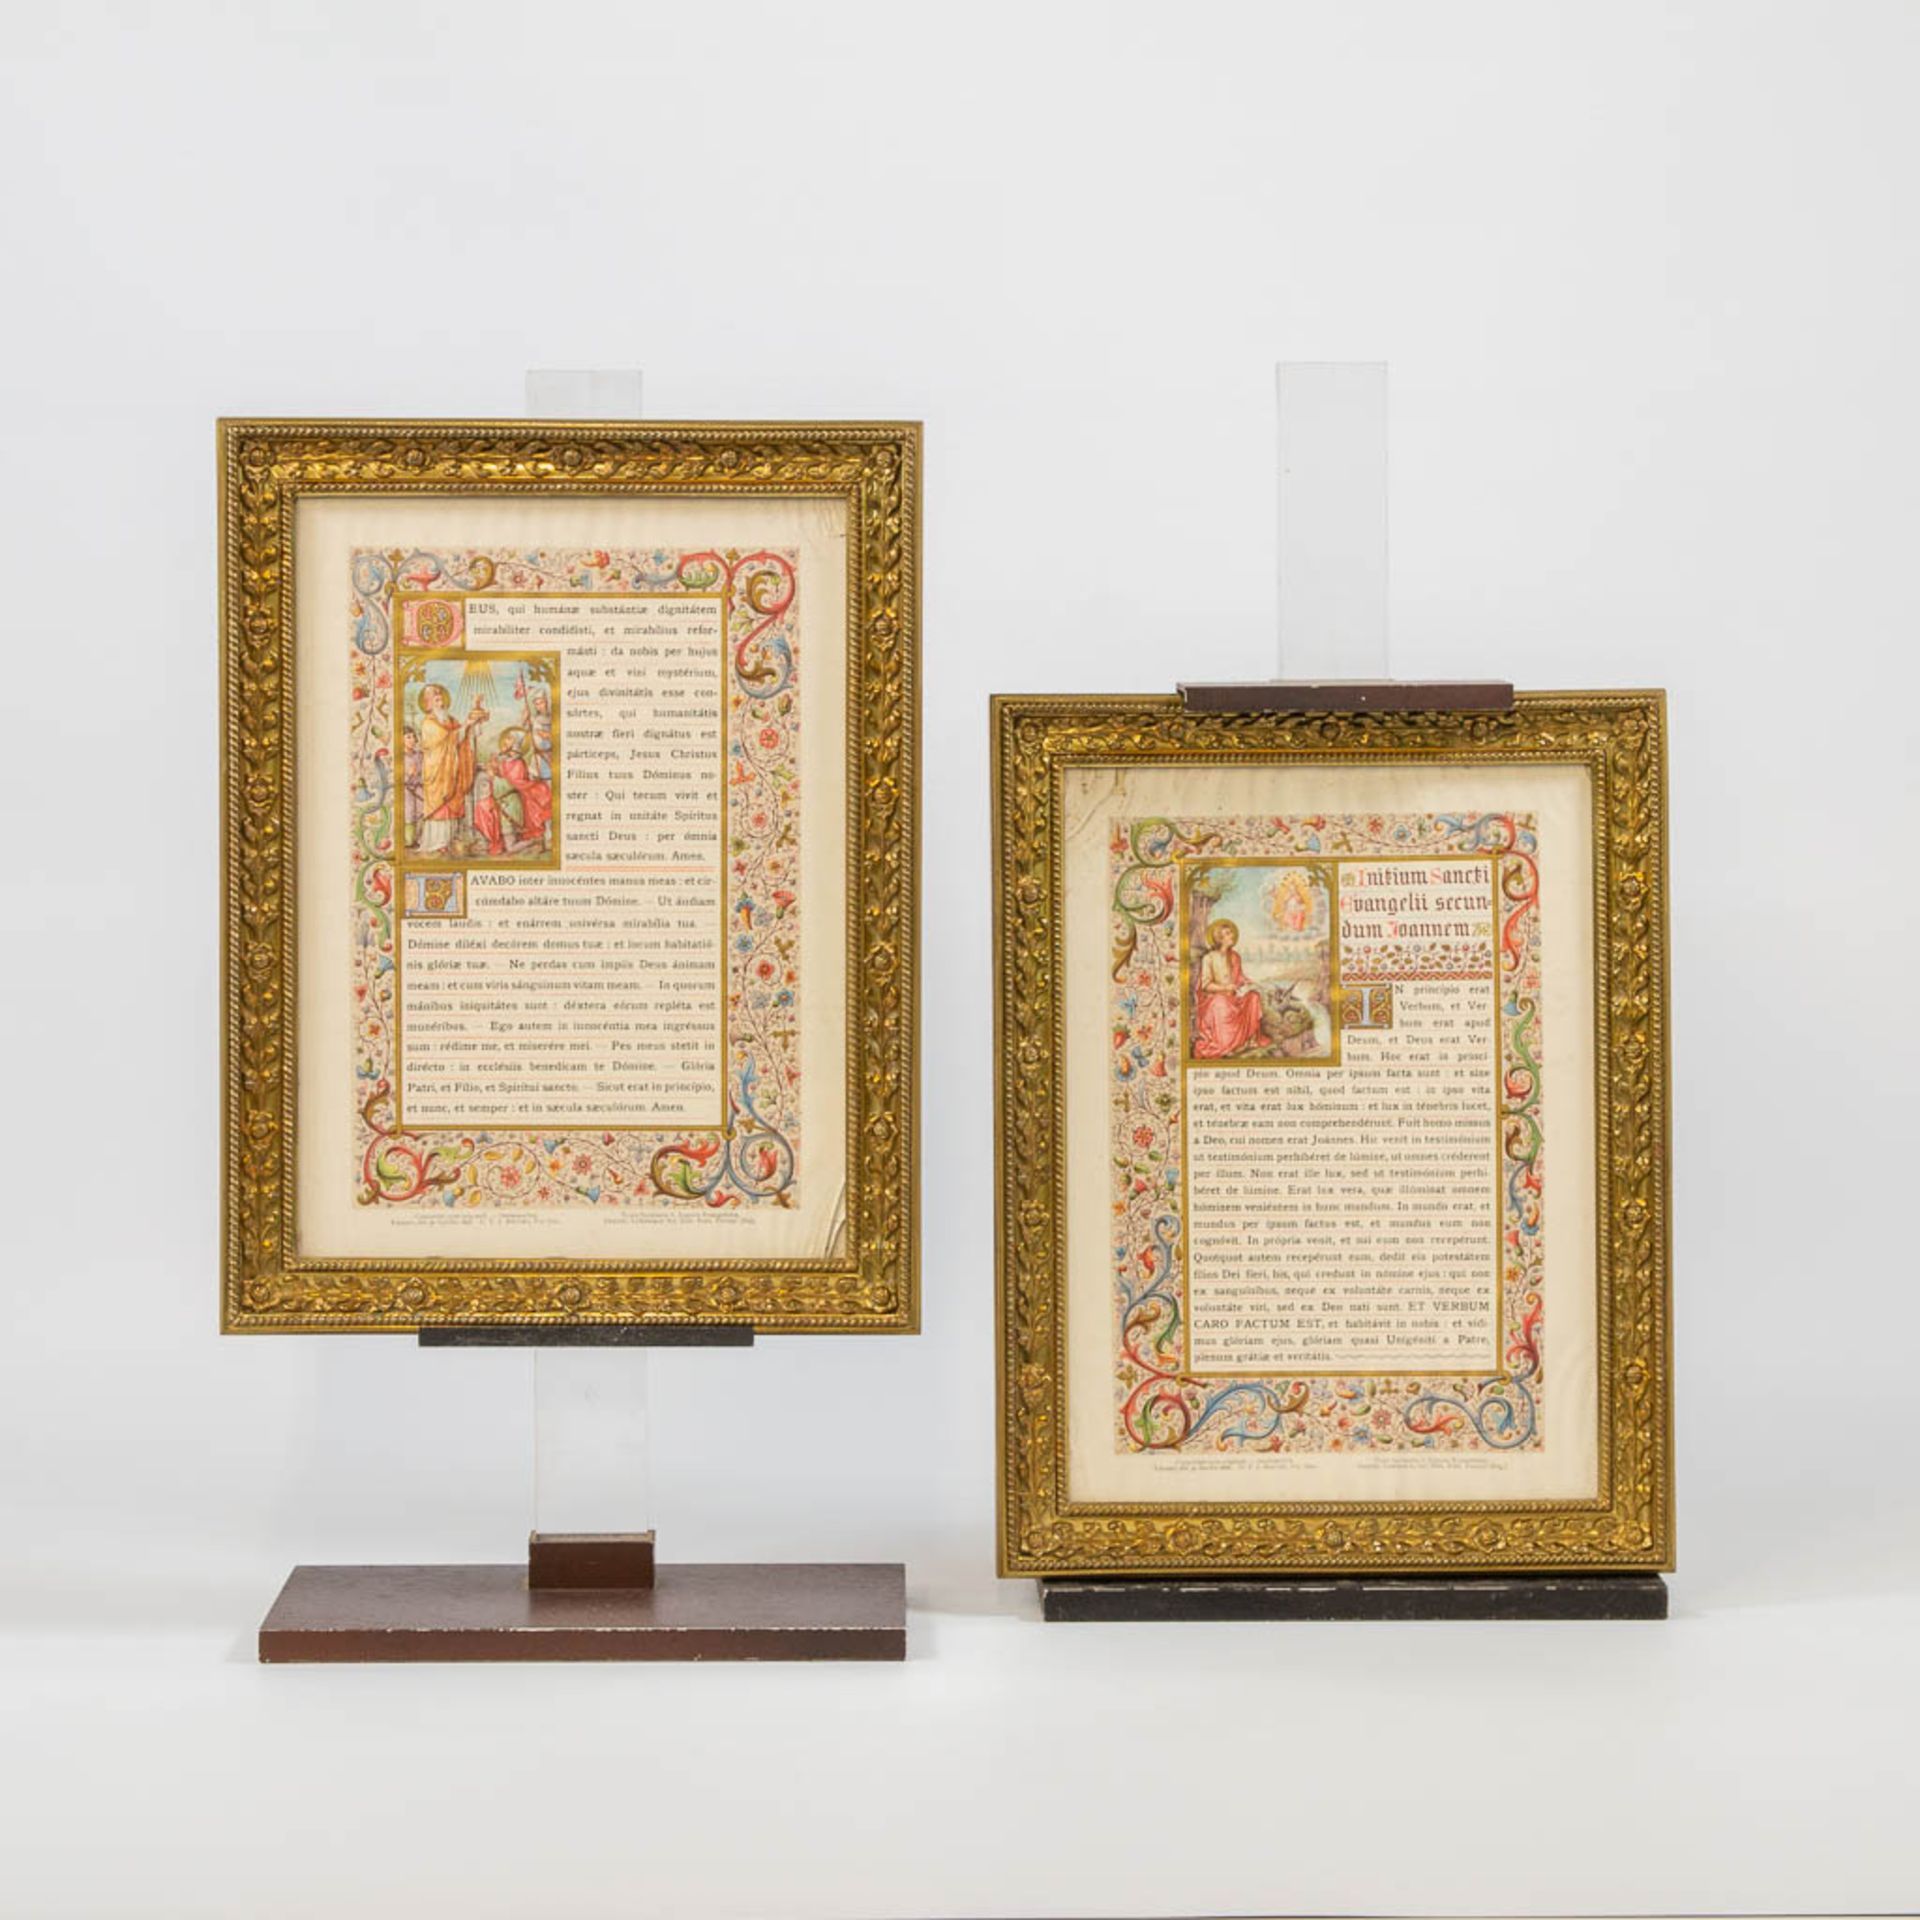 A pair of bronze picture frames